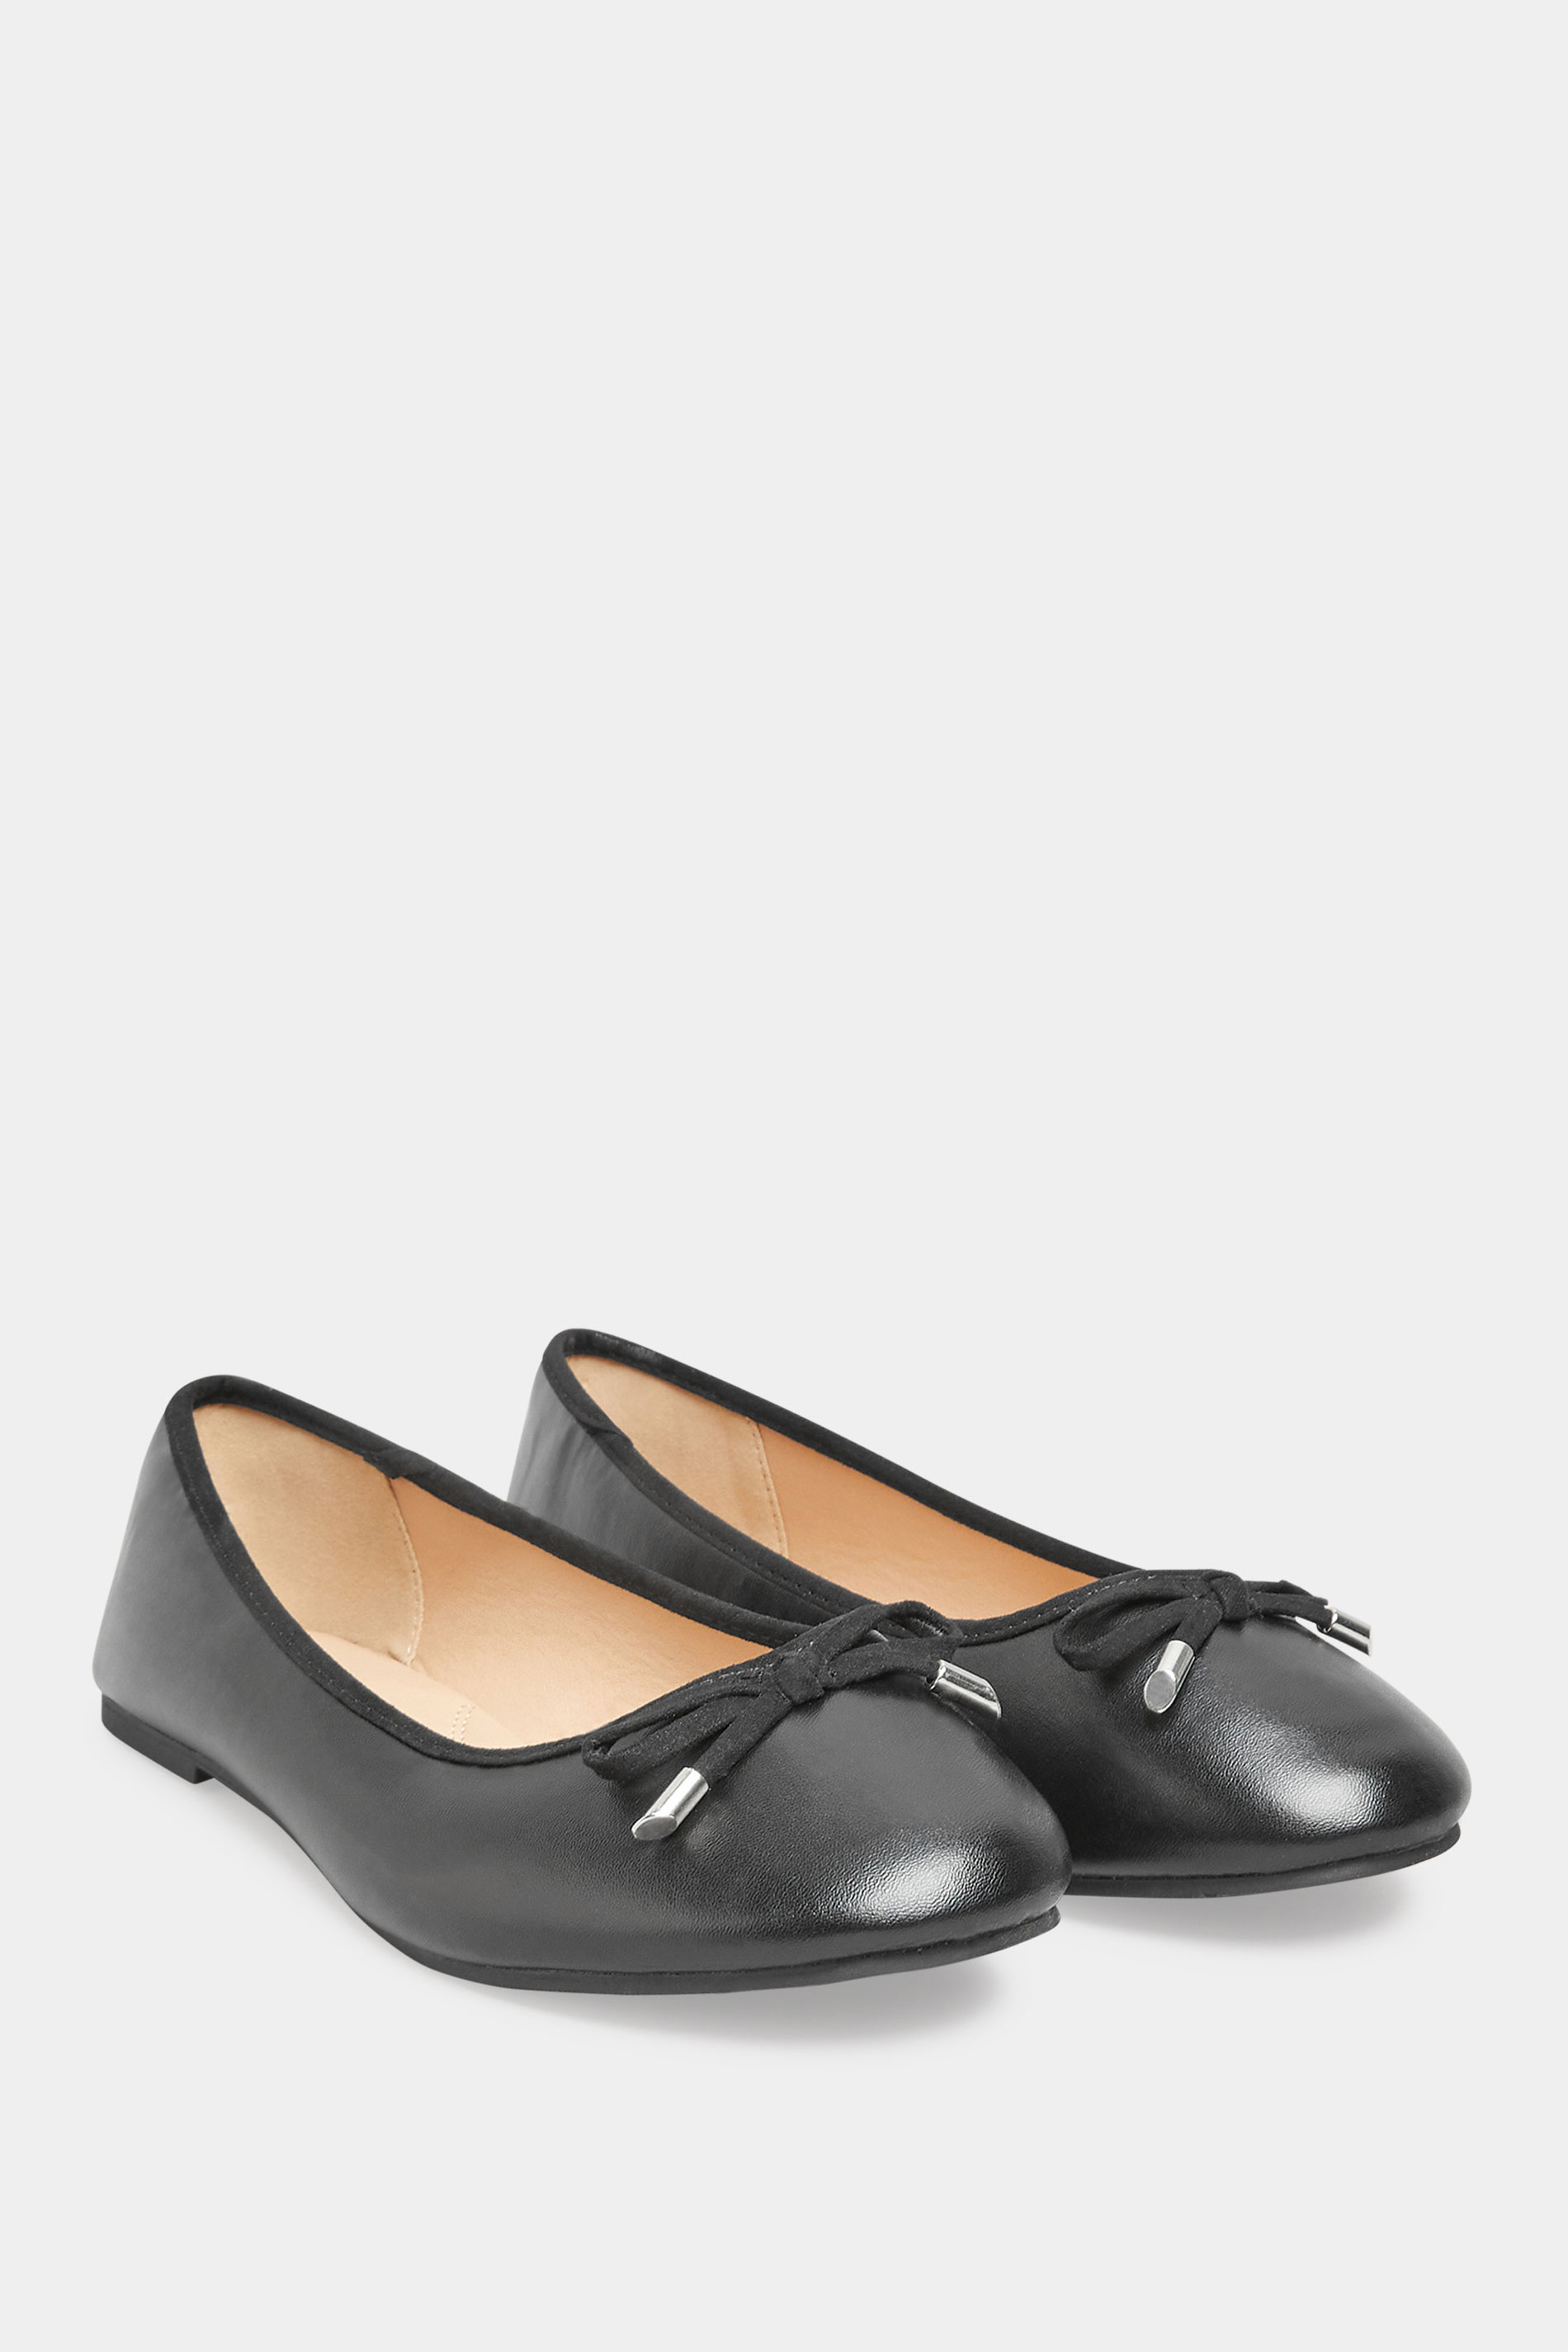 Black Ballerina Pumps In Wide E Fit & Extra Wide EEE Fit | Yours Clothing 2